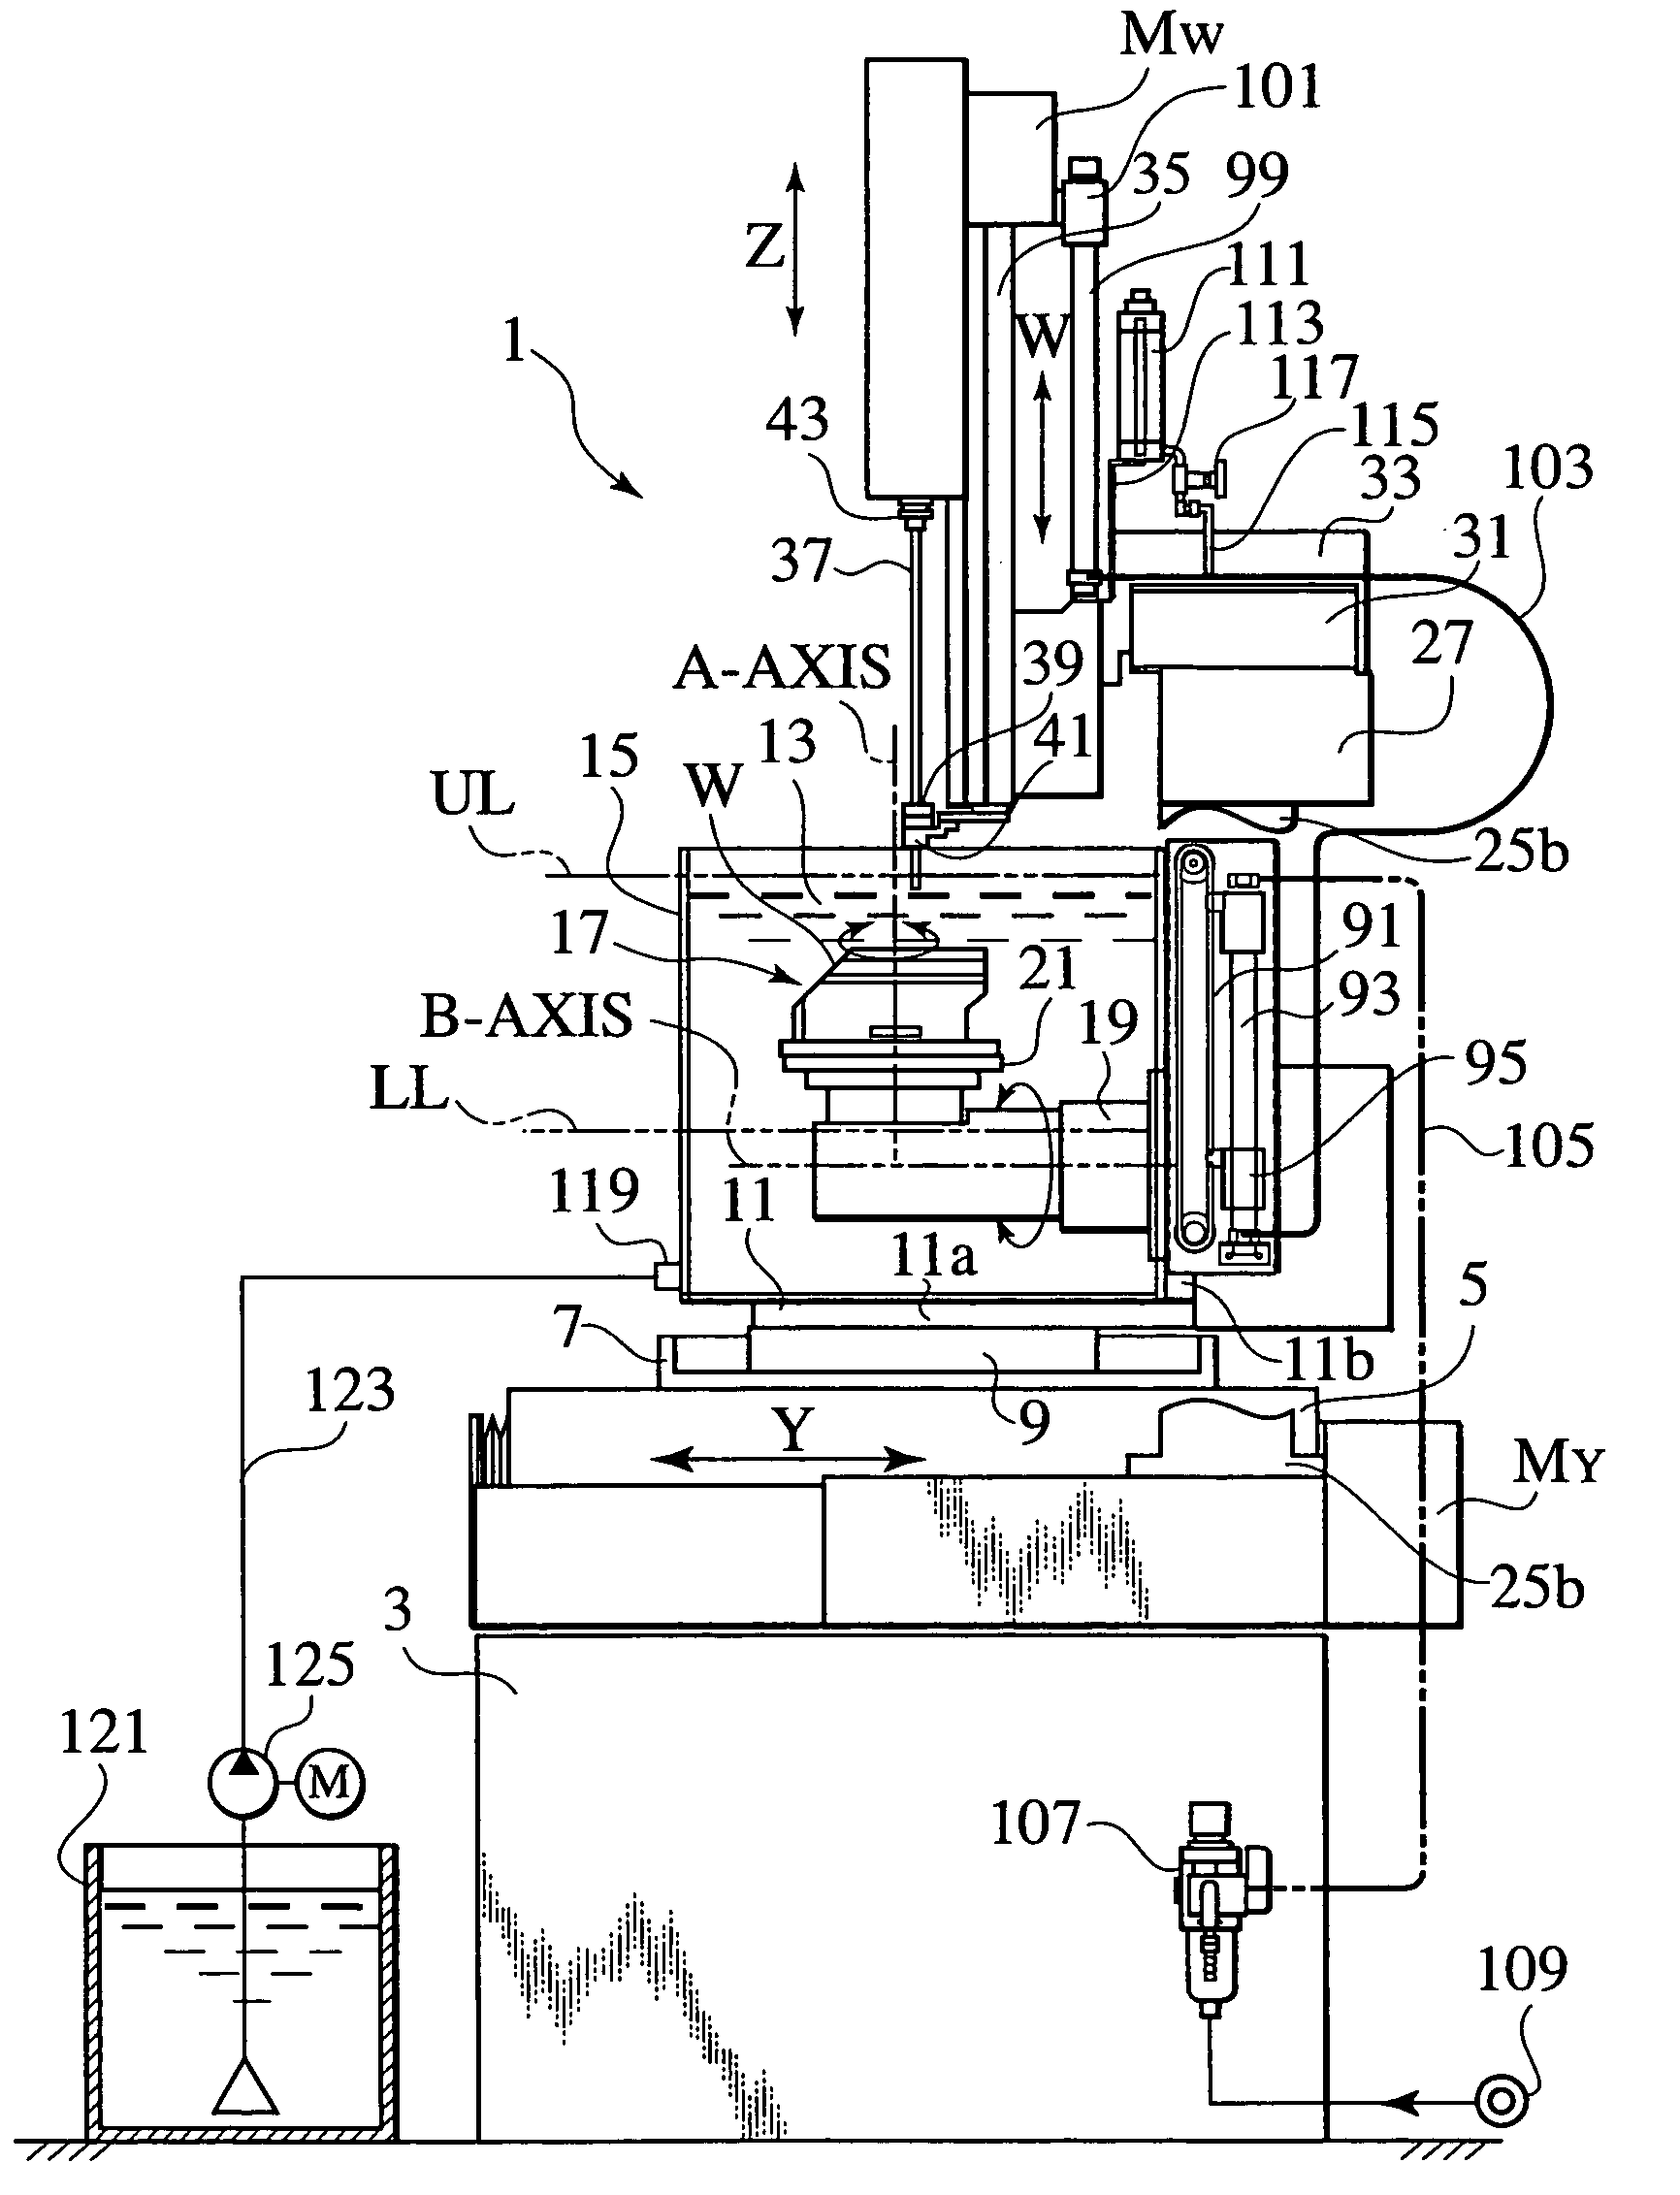 Small-hole electrical discharge machining device and multiple diesinking-and-small-hole electrical discharge machining device, and method for multiple diesinking-and-small-hole electrical discharge machining with the same device